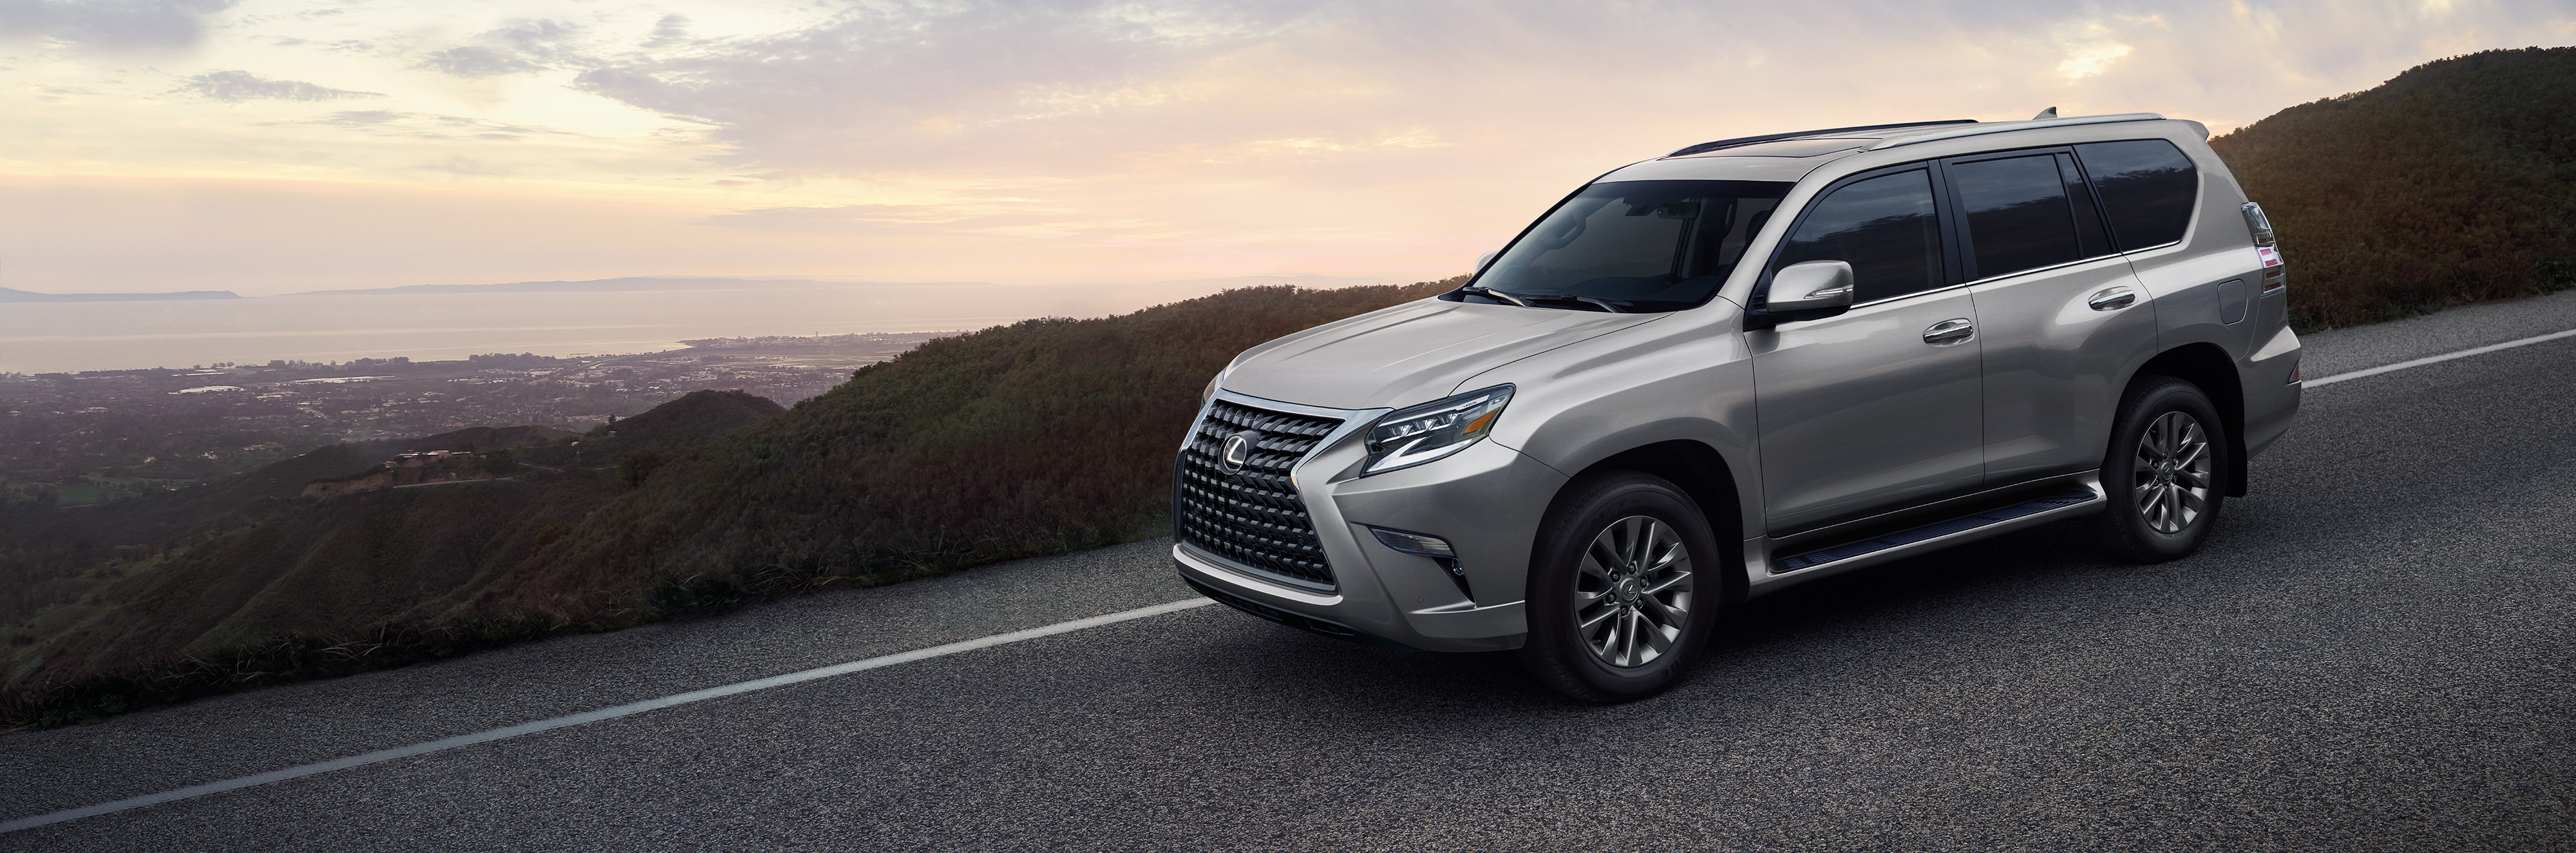 Silver Lexus GX, Available Now at Lexus of Thousand Oaks